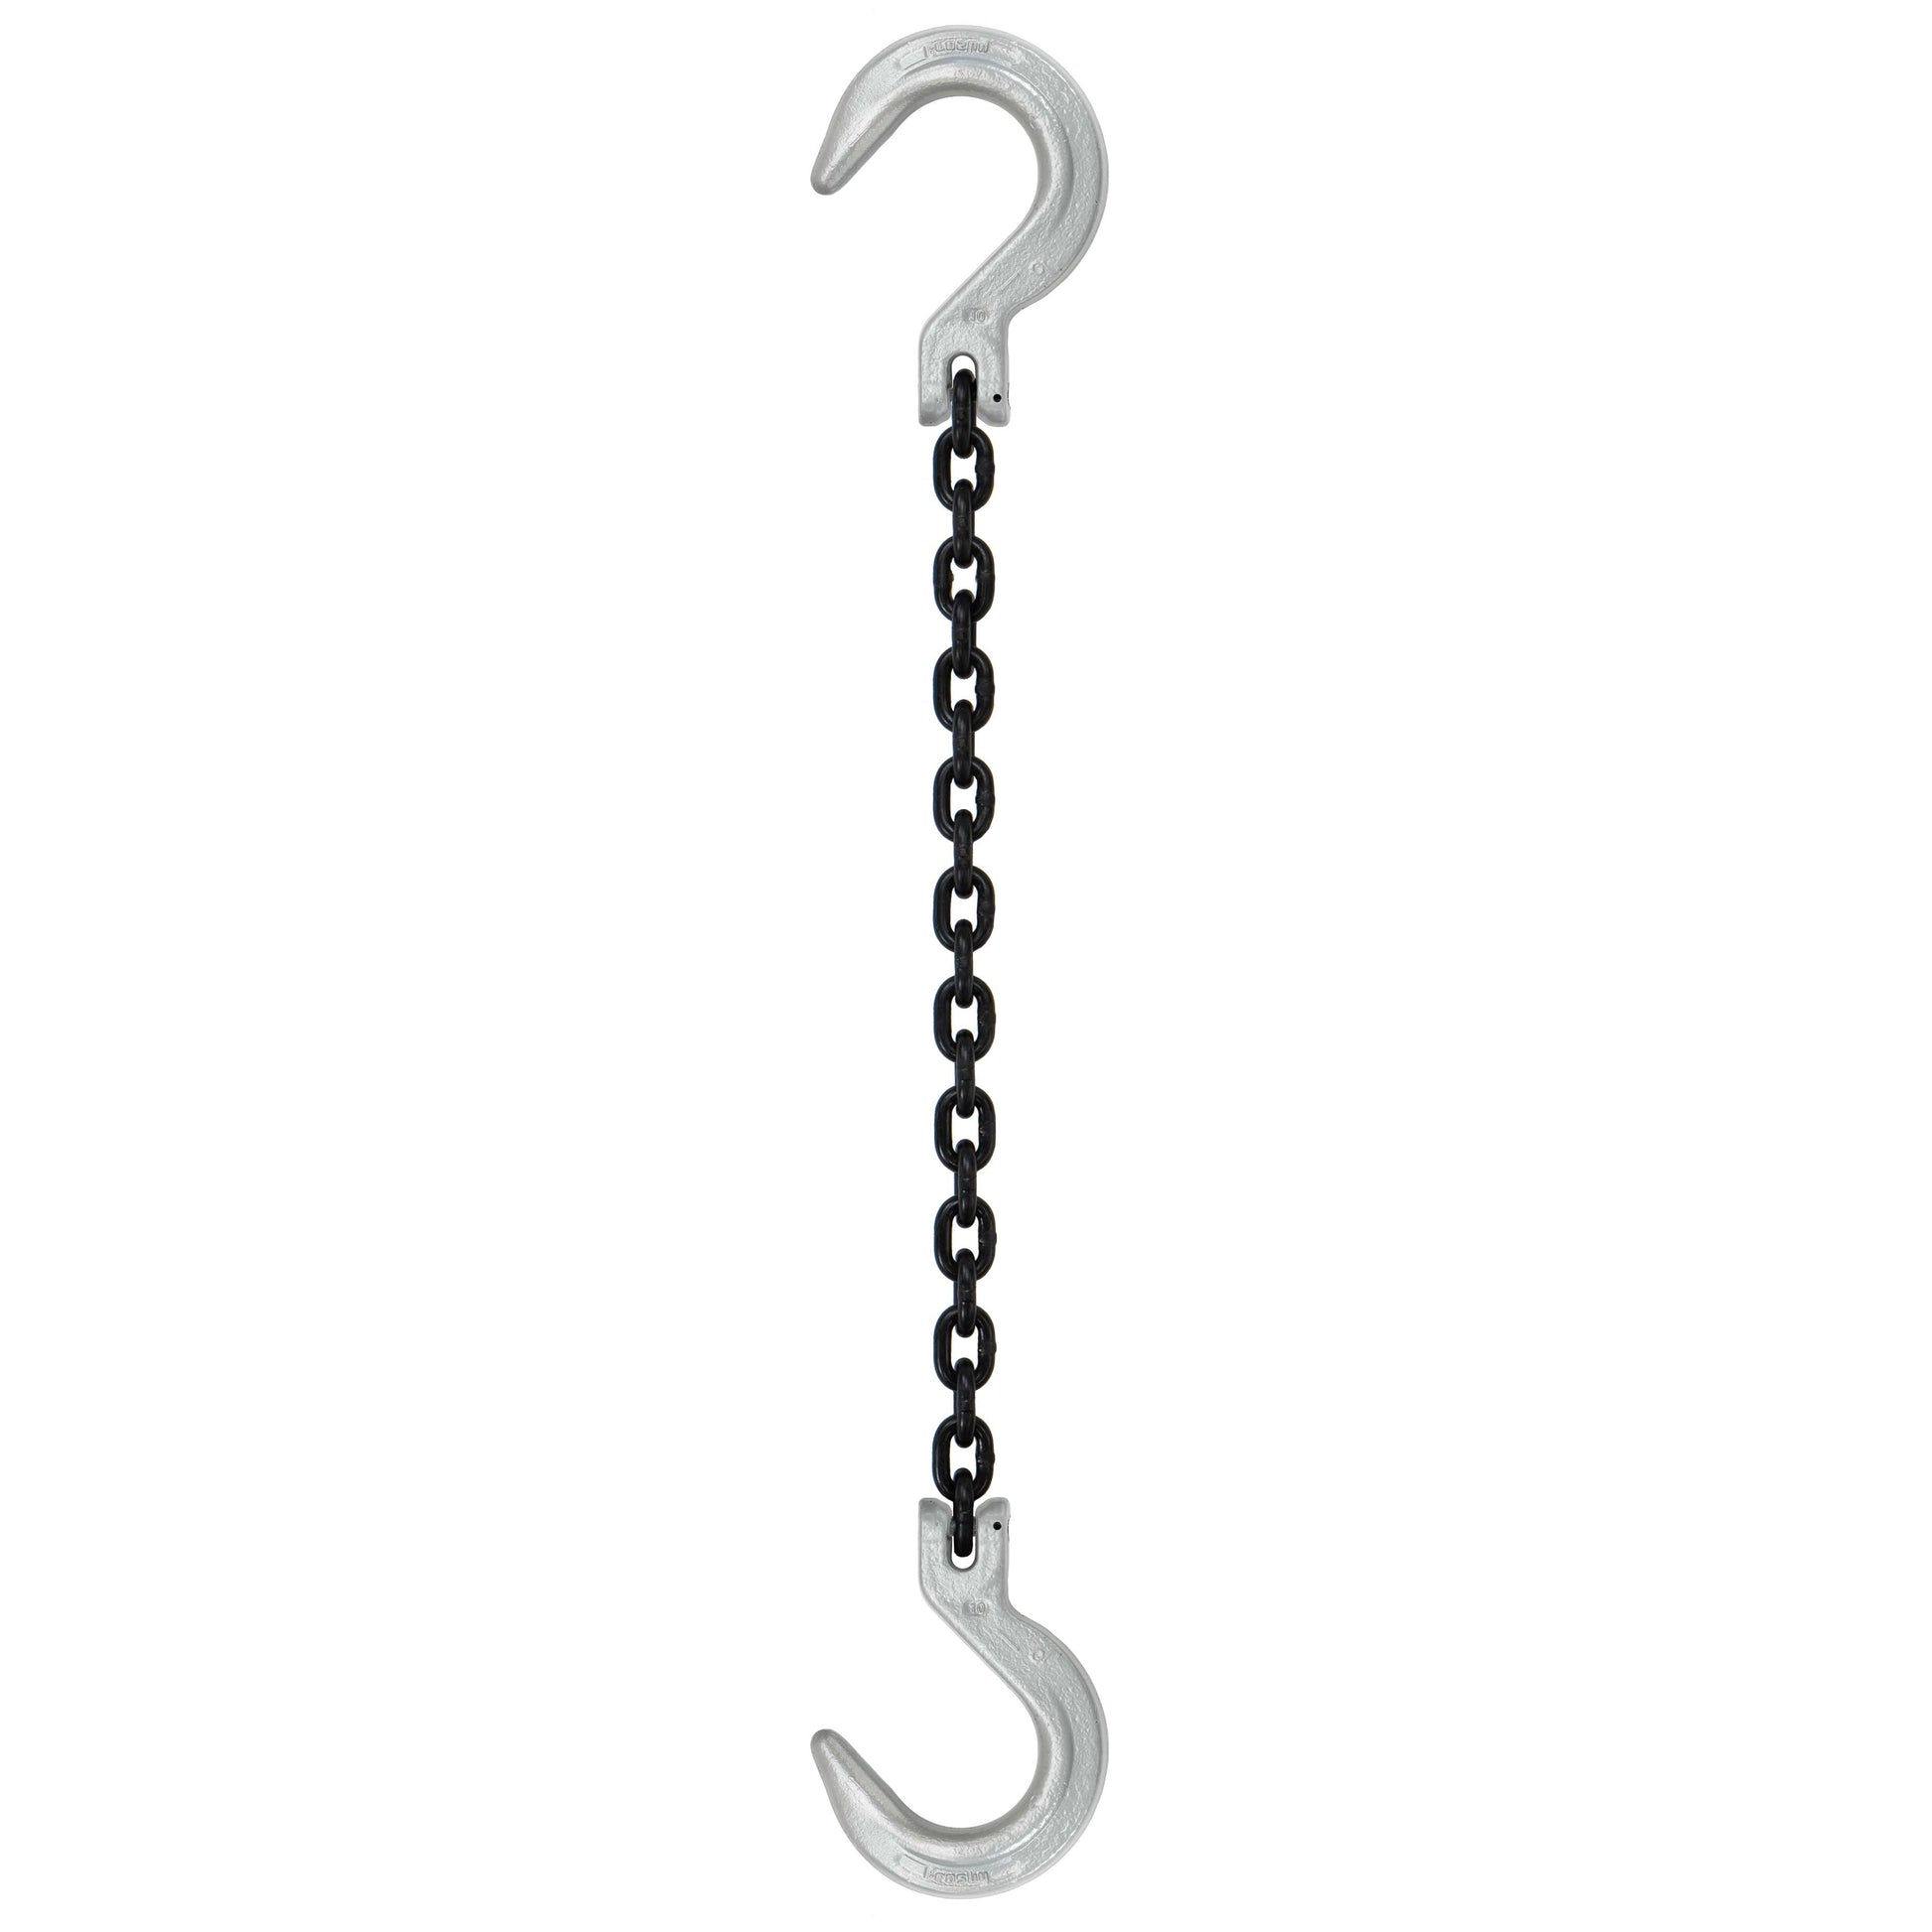 12 inch x 20 foot Domestic Single Leg Chain Sling w Crosby Foundry & Foundry Hooks Grade 100 image 1 of 2